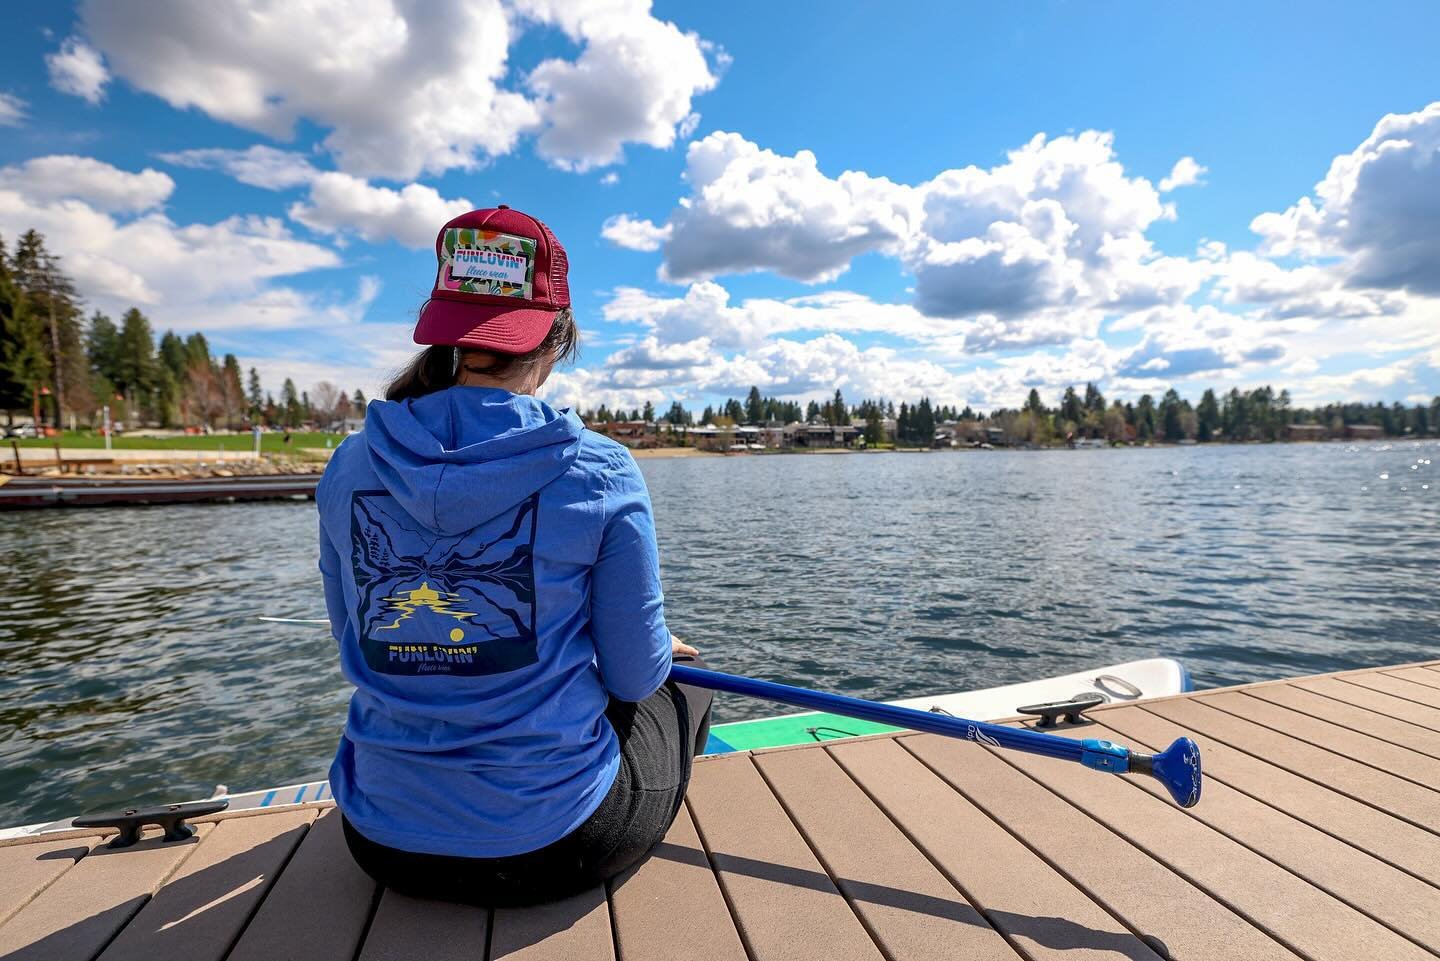 Protect your skin this spring with a FunLuvin&rsquo; Sun Hoodie! 

Original Idaho inspired artwork by @ericalaidlaw 

Now on Sale for $30 and available in sizes XS-2X! 

PC @samantha_sais_photography

#funluvinfleecewear #funluvinfleece #funluvin #su